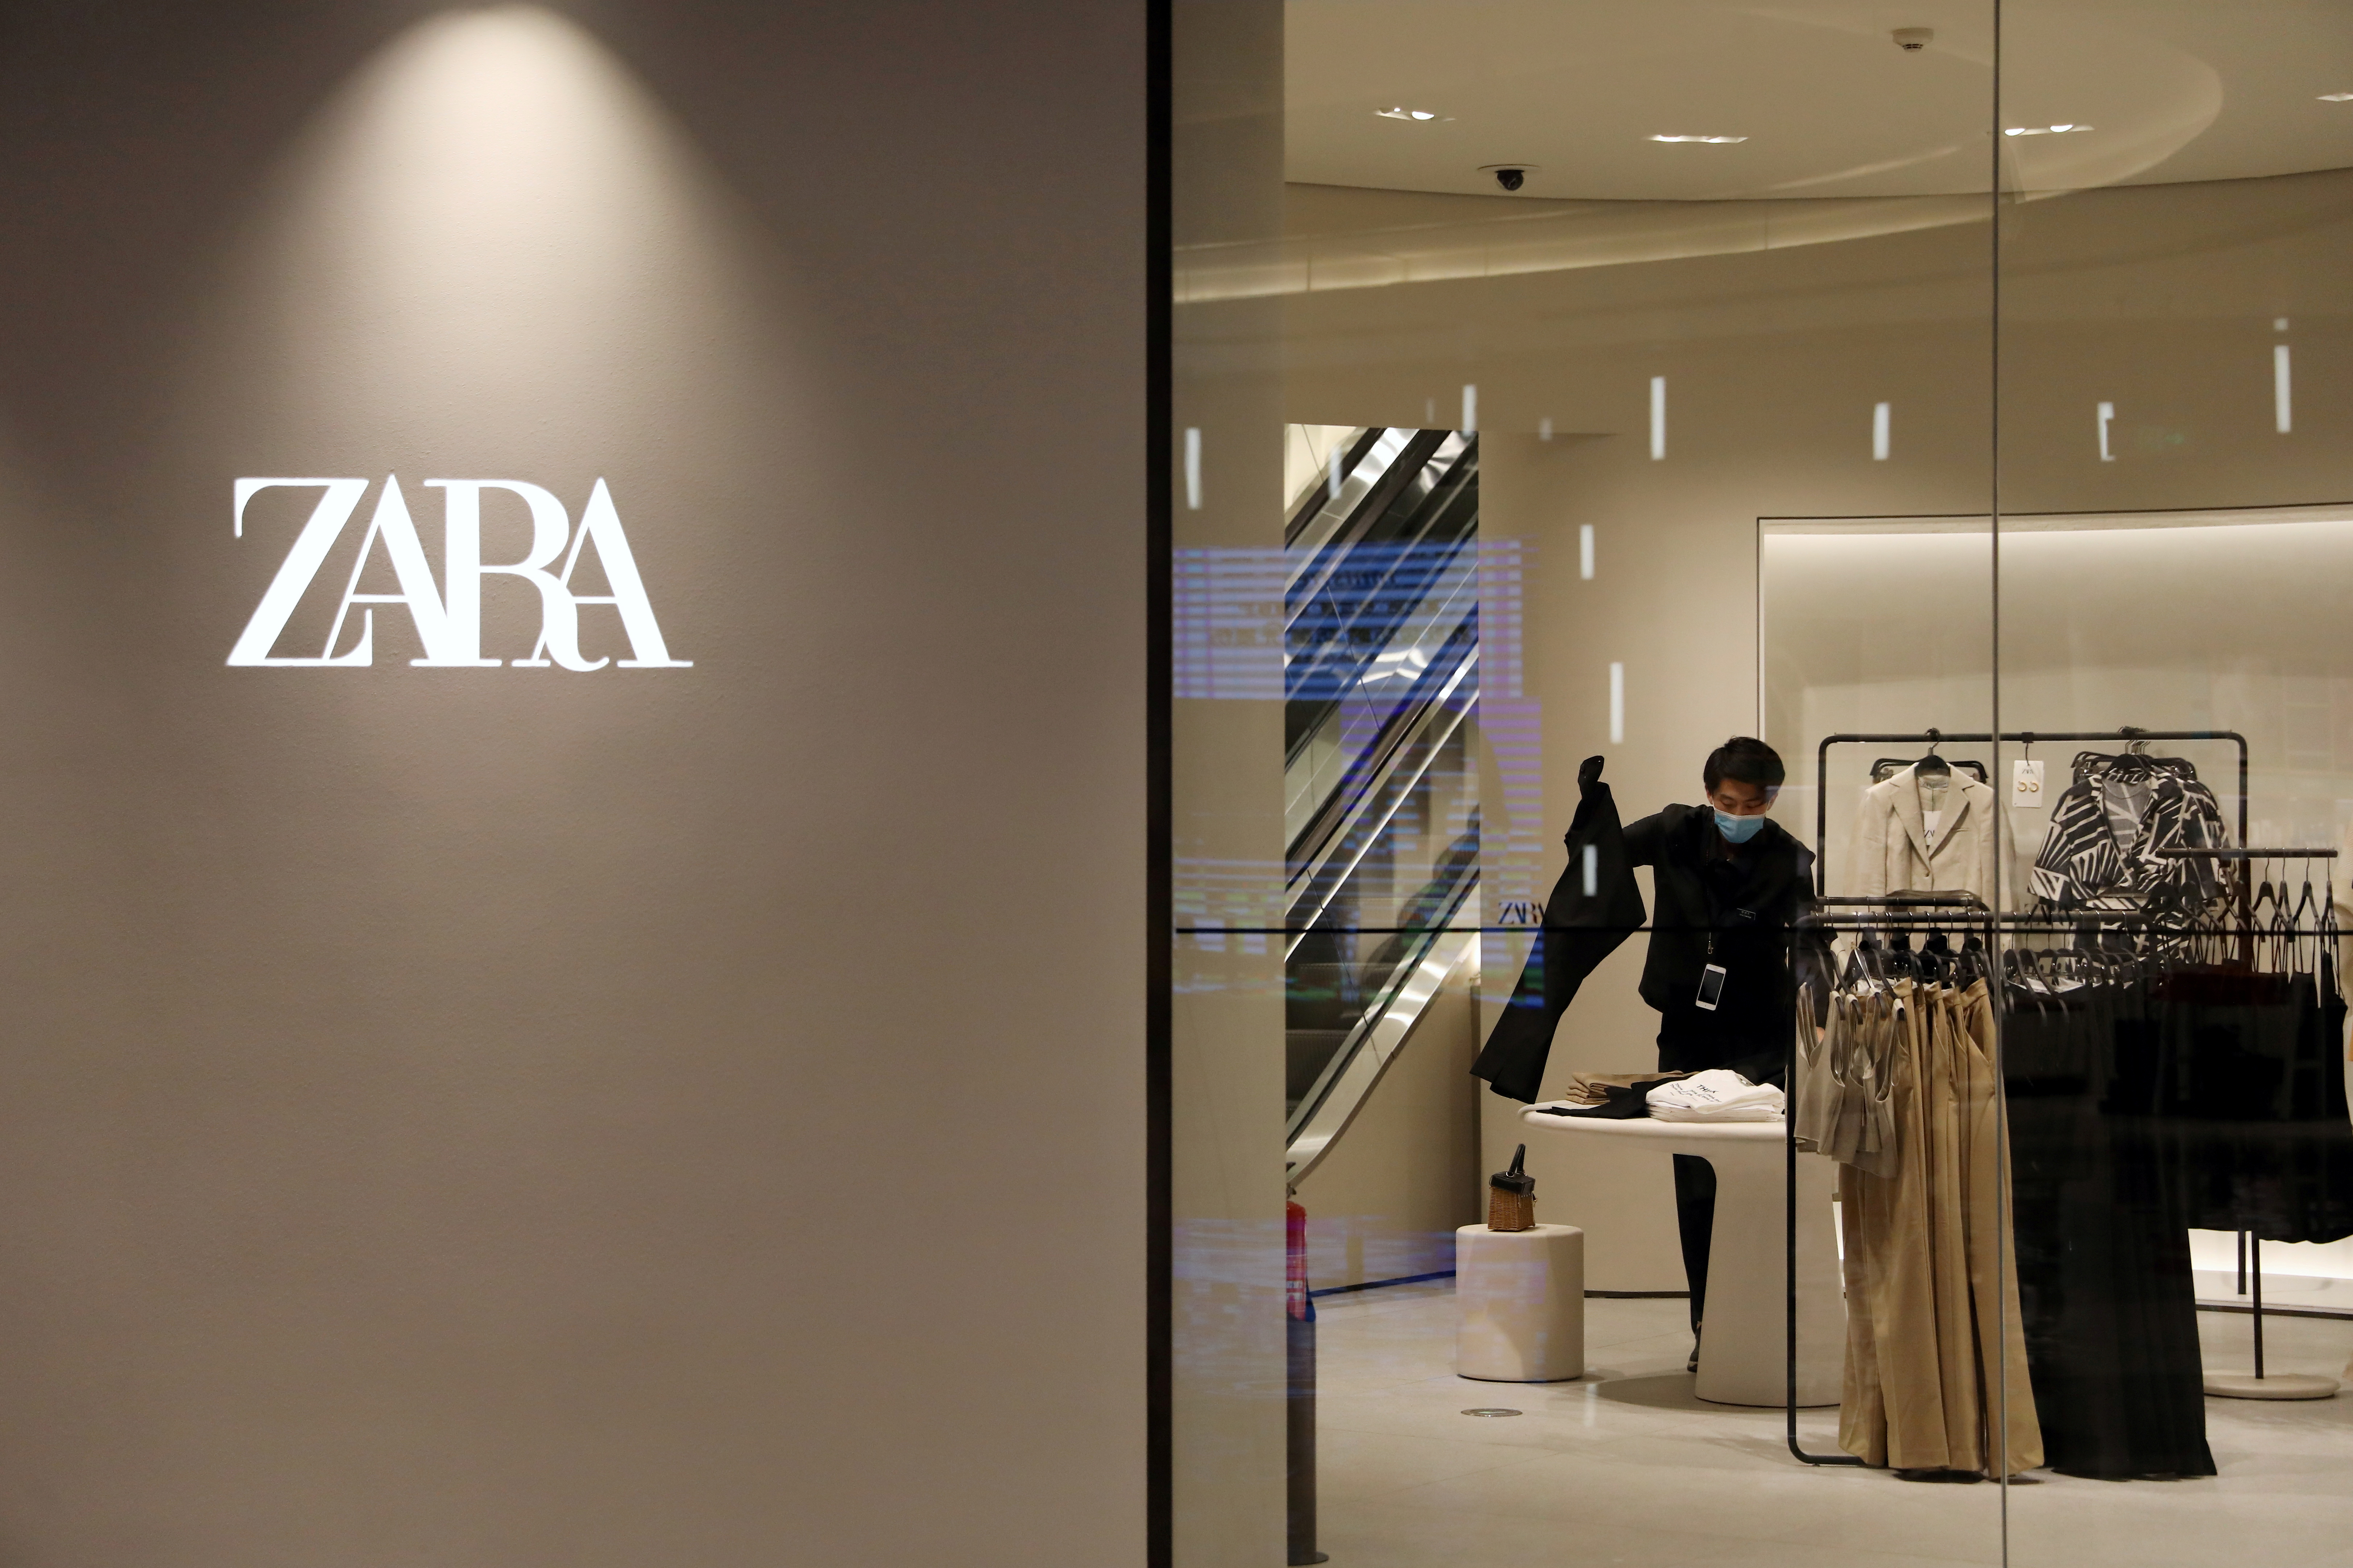 Fjord Children's day home delivery H&M lags Zara-owner Inditex in race to regain lost sales | Reuters